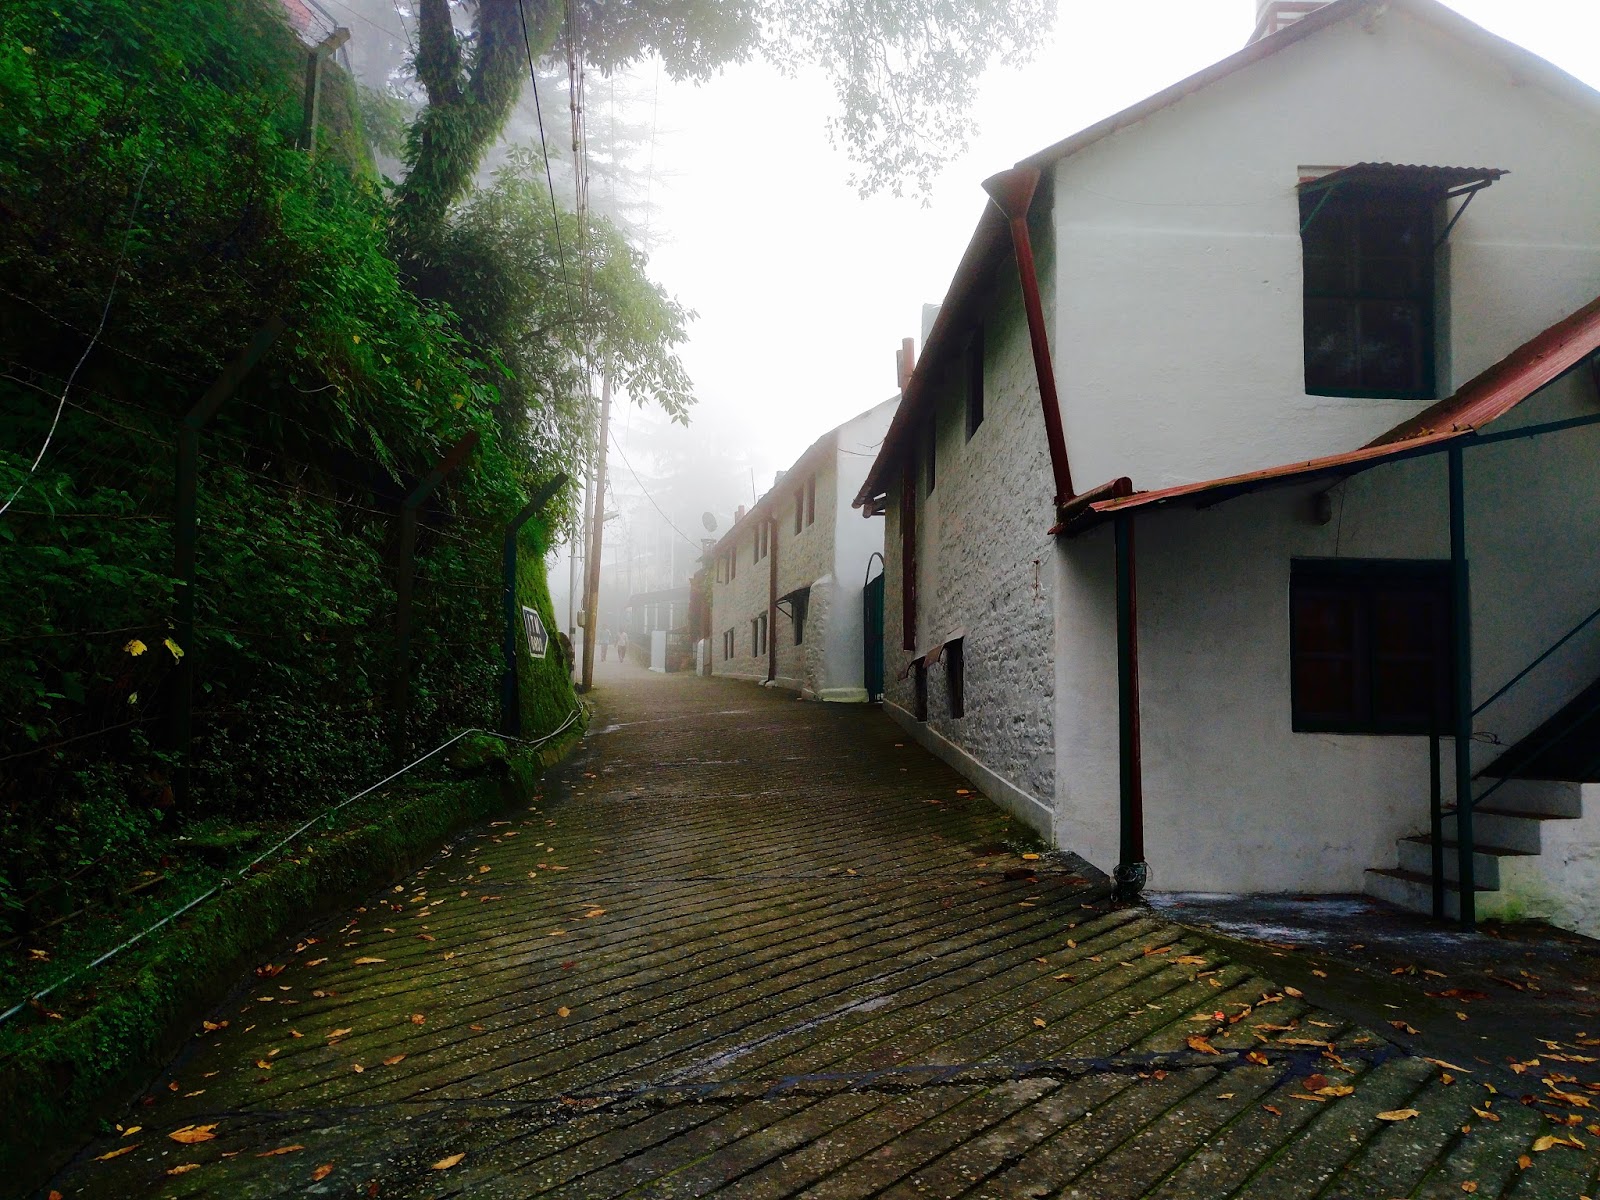 Whitewashed stone walled homes with red tin roofs in Landour, paved pathways and lush greens